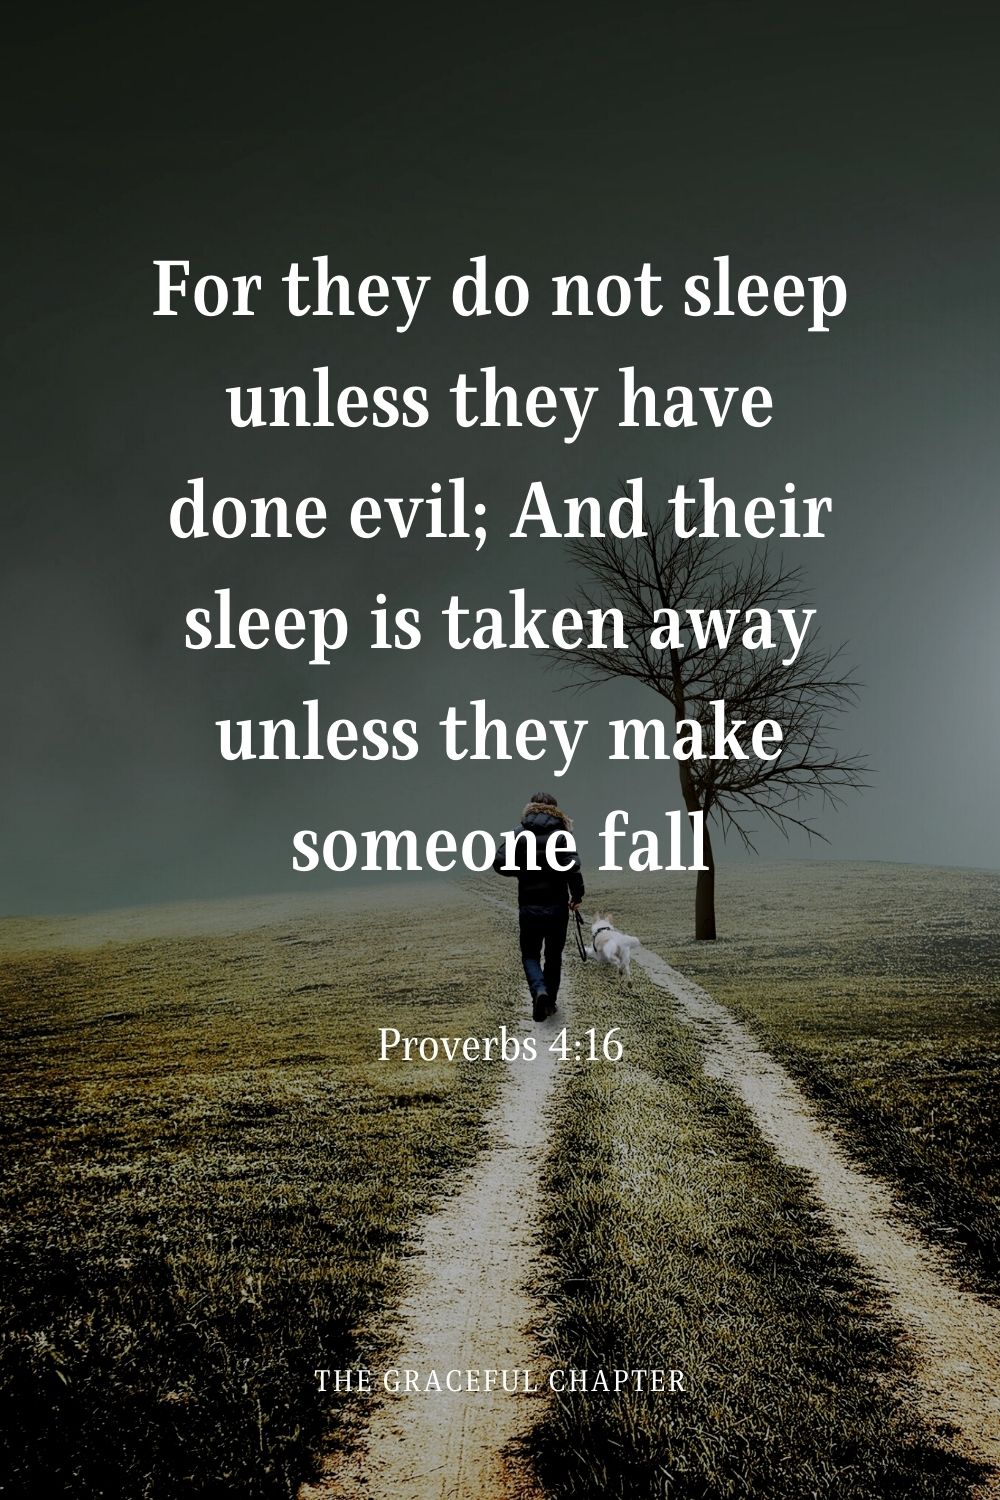 For they do not sleep unless they have done evil; And their sleep is taken away unless they make someone fall